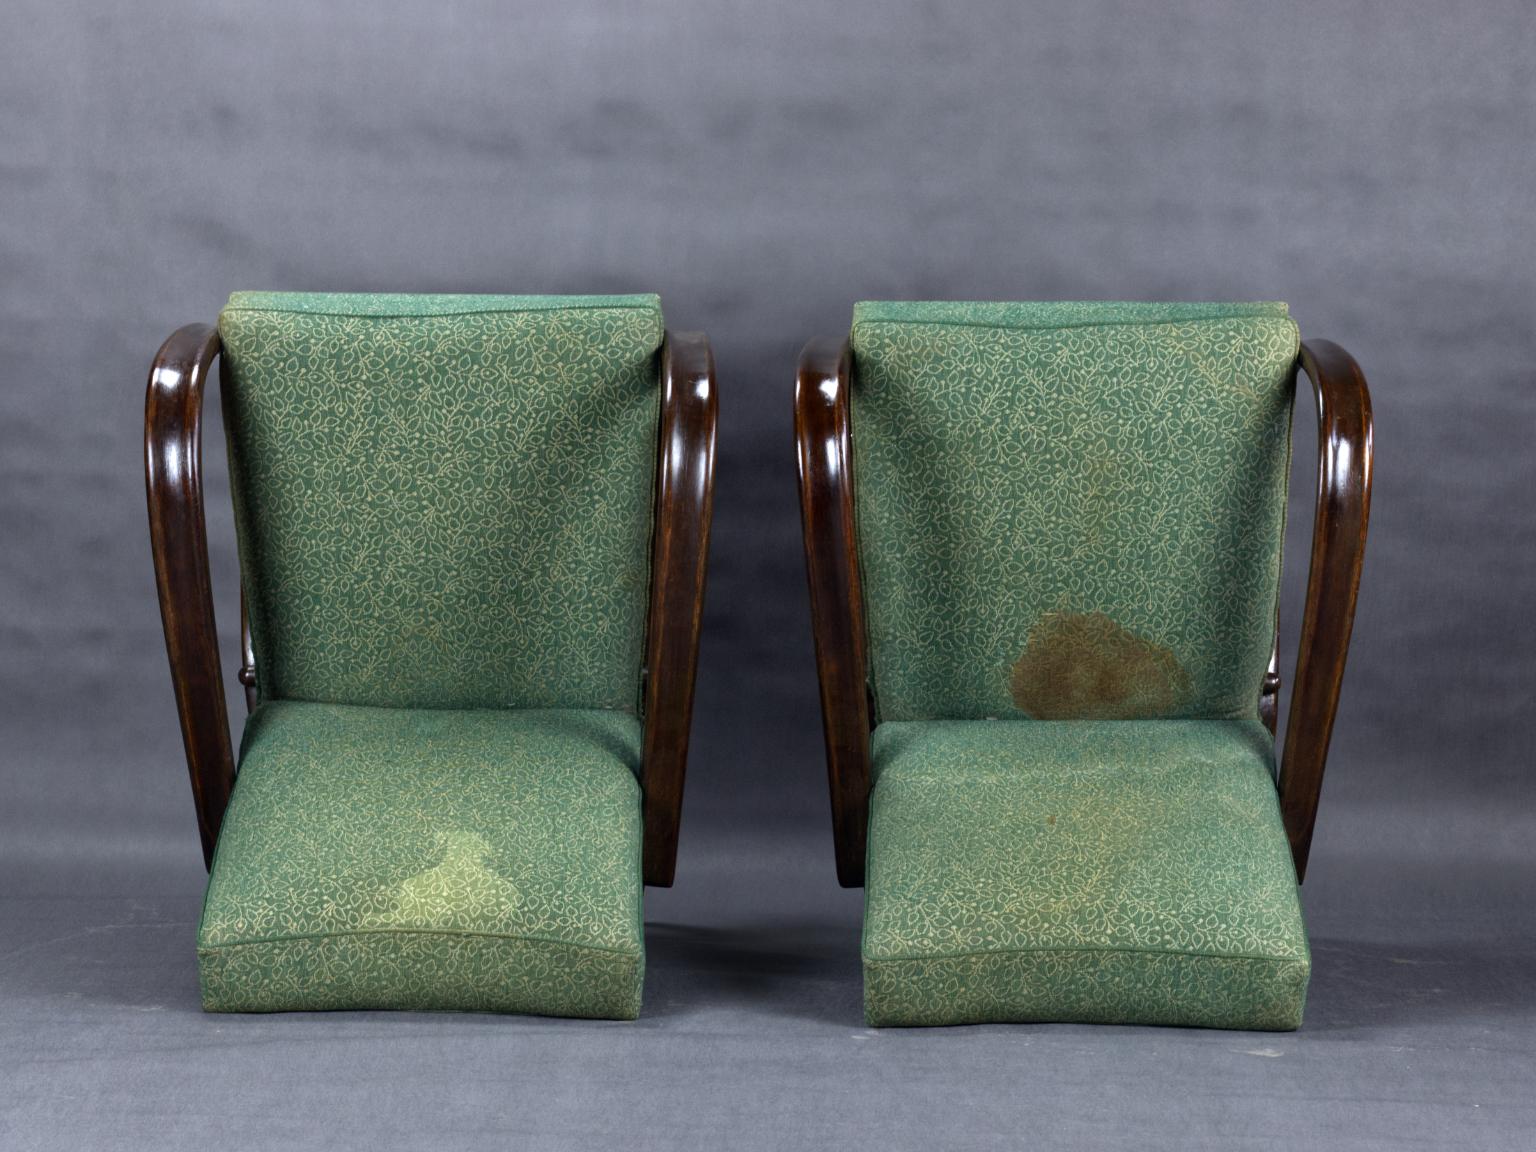 Bentwood Pair of H 269 Lounge Chairs by Jindřich Halabala for Up Závody Brno, 1930s